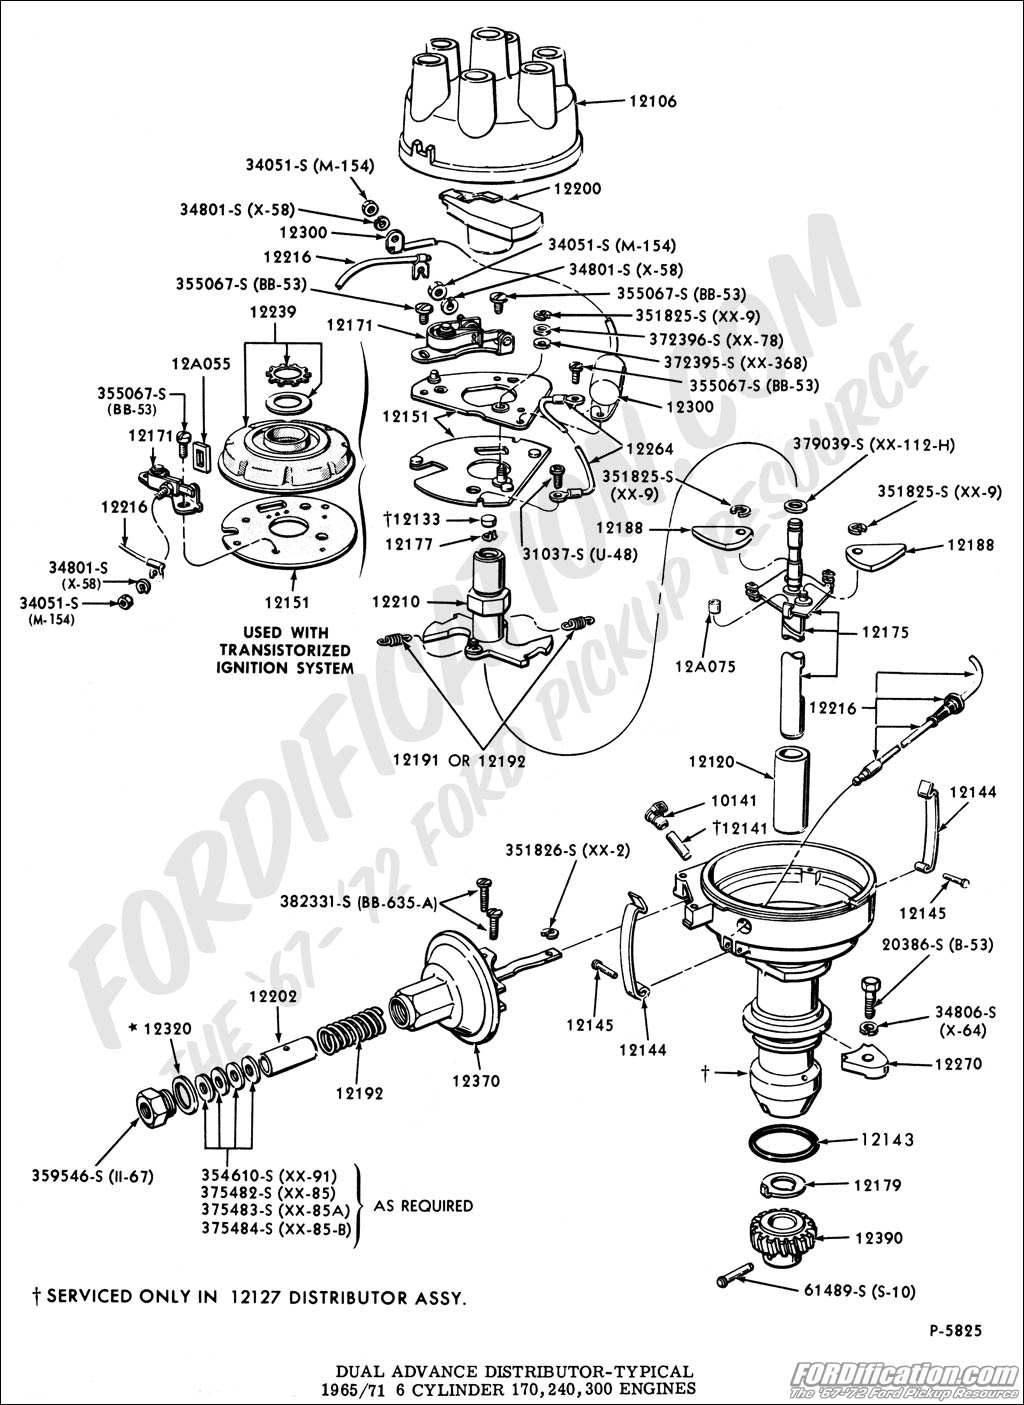 Ford 302 Distributor Wiring Diagram from www.fordification.com